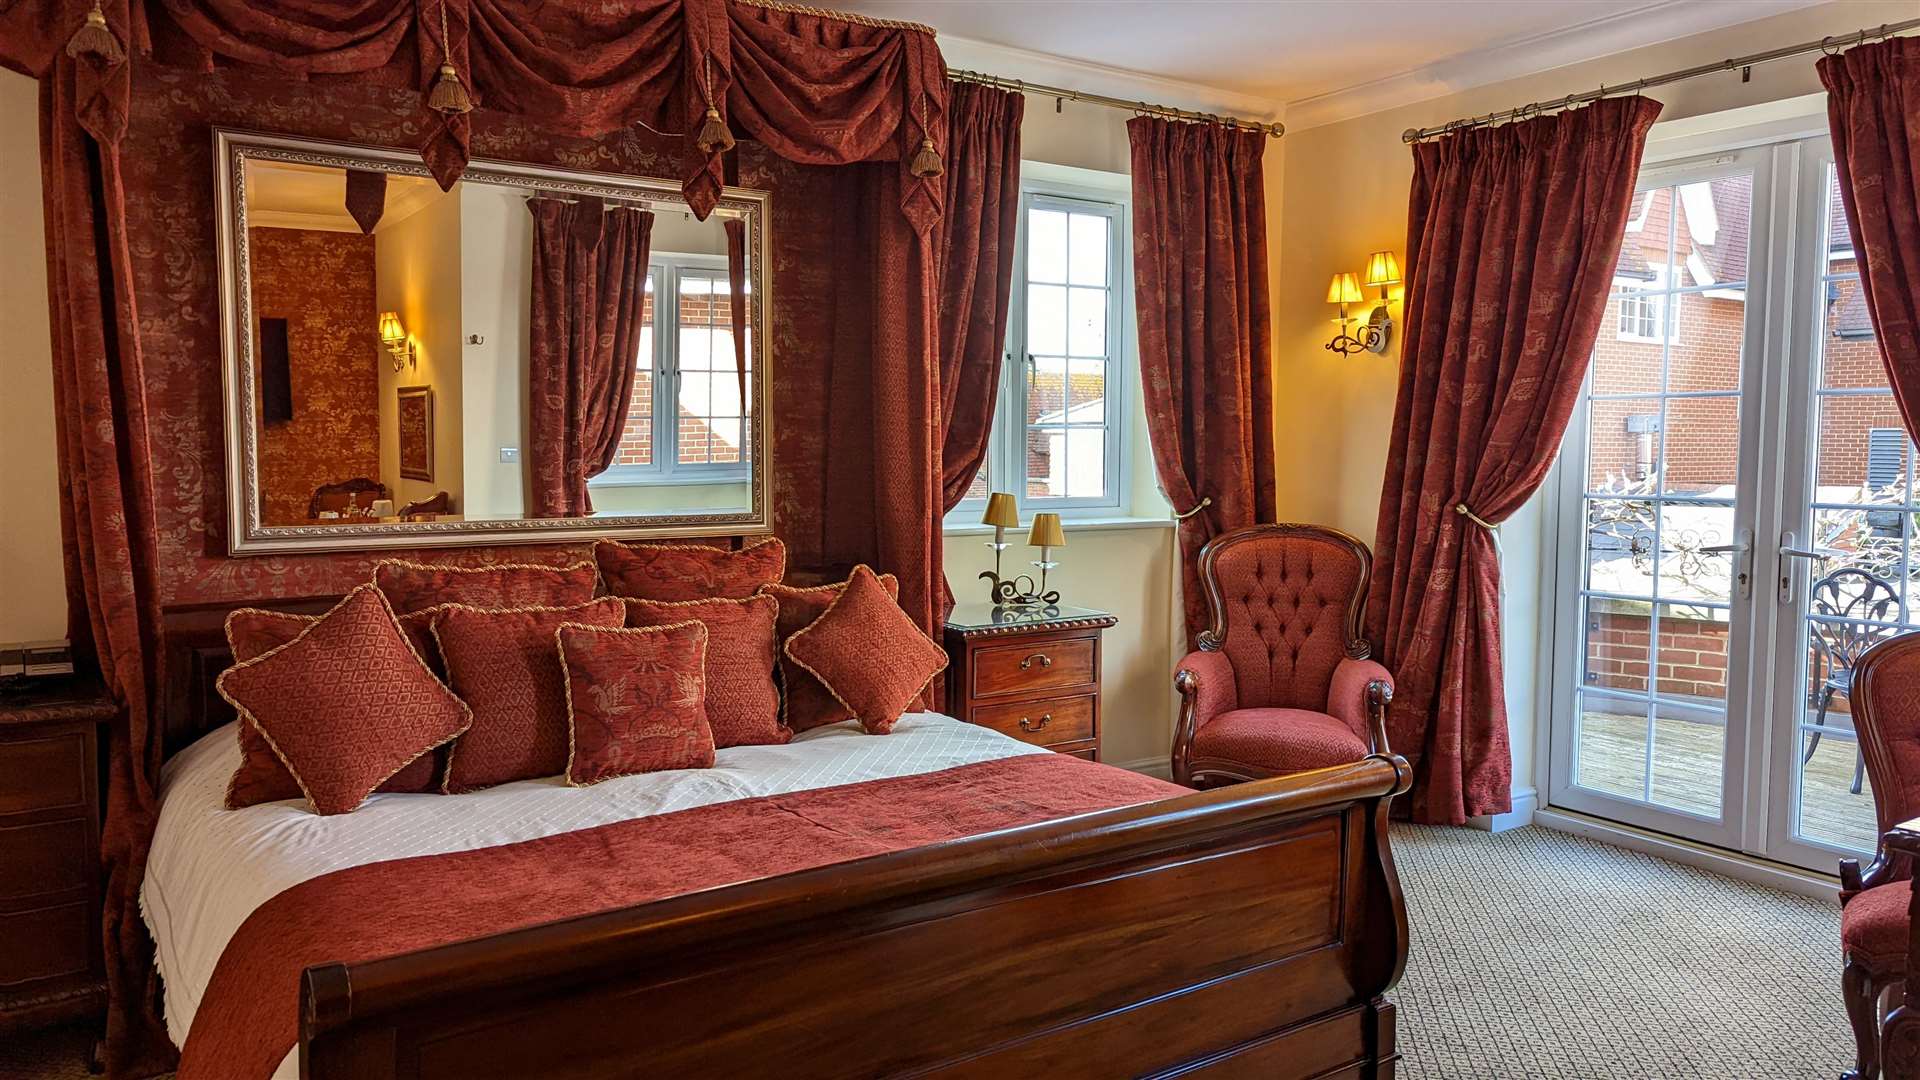 One of the Sittingbourne hotel's 35 bedrooms. Picture: Hempstead House